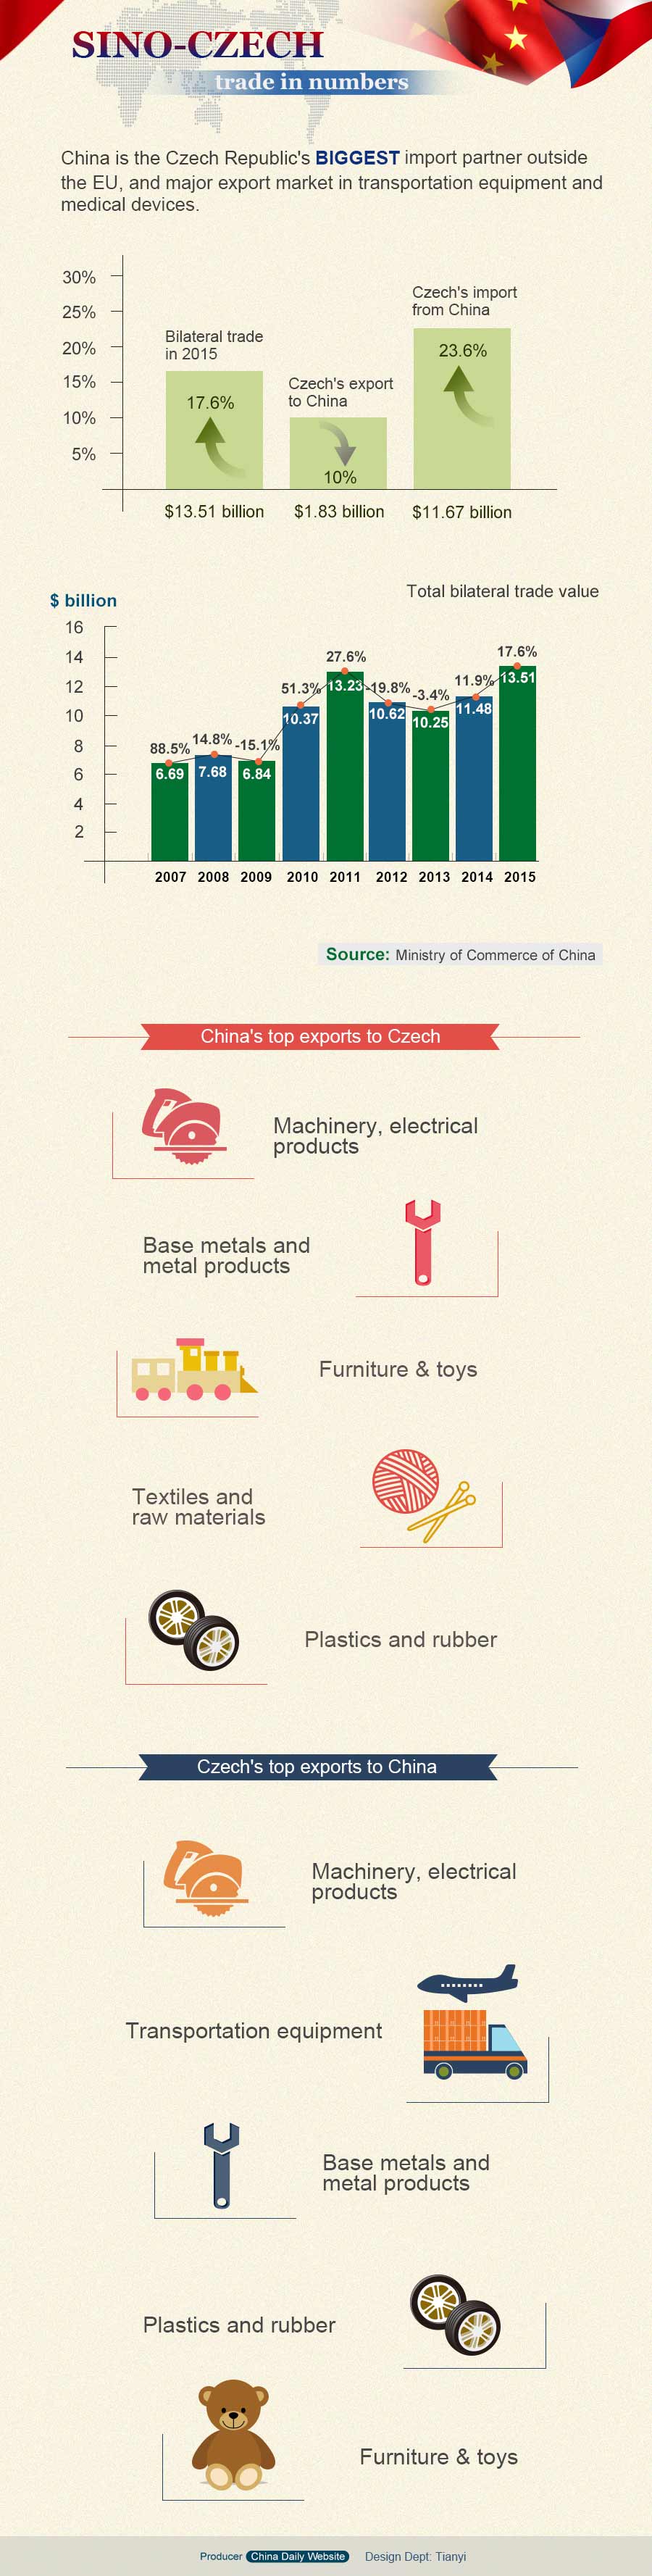 Infographic: Sino-Czech trade in numbers